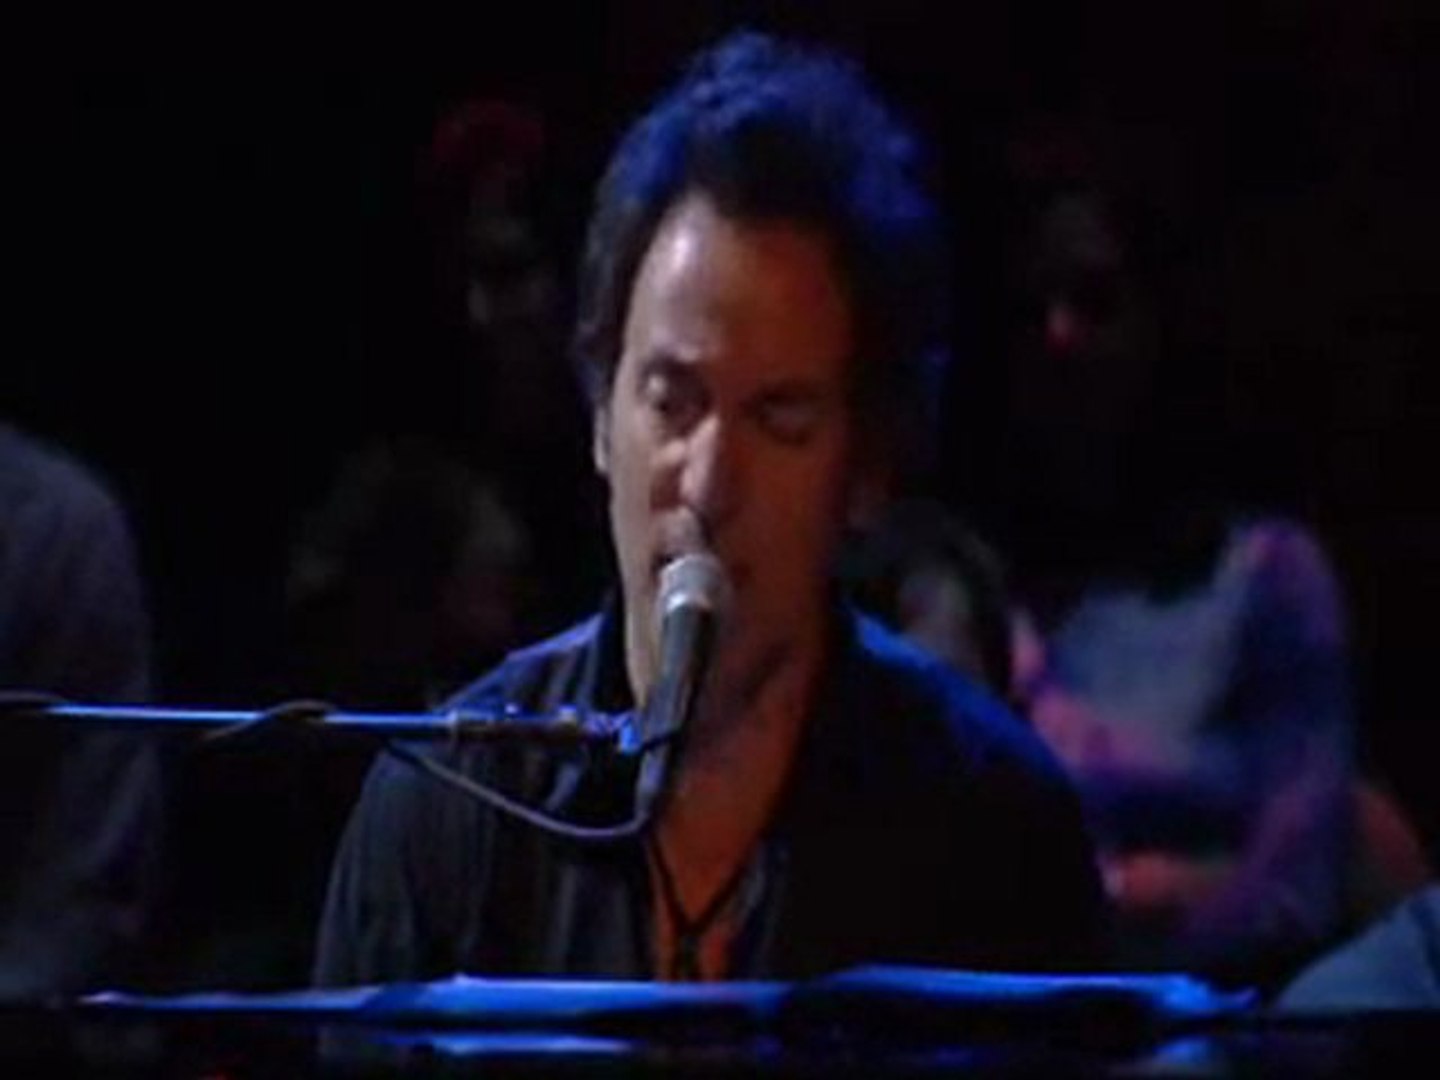 Thunder road ( solo piano ) bruce springsteen - video Dailymotion